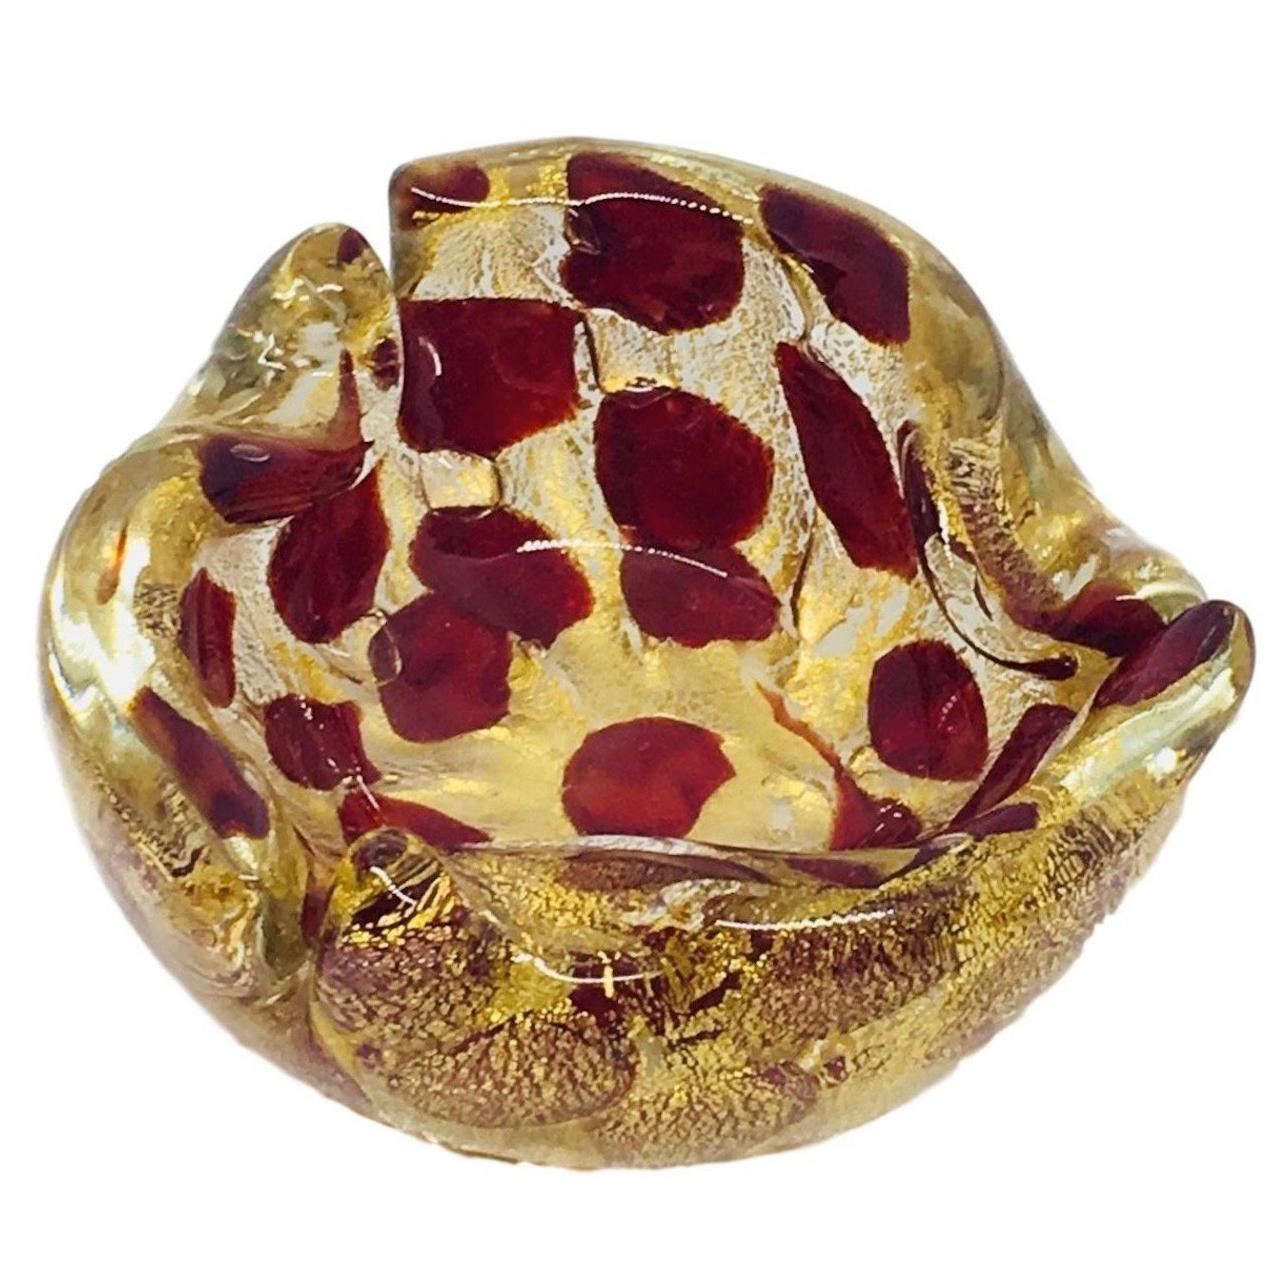 Murano Art Glass Bowl Gold Flake and Red Vintage, Italy, 1950s